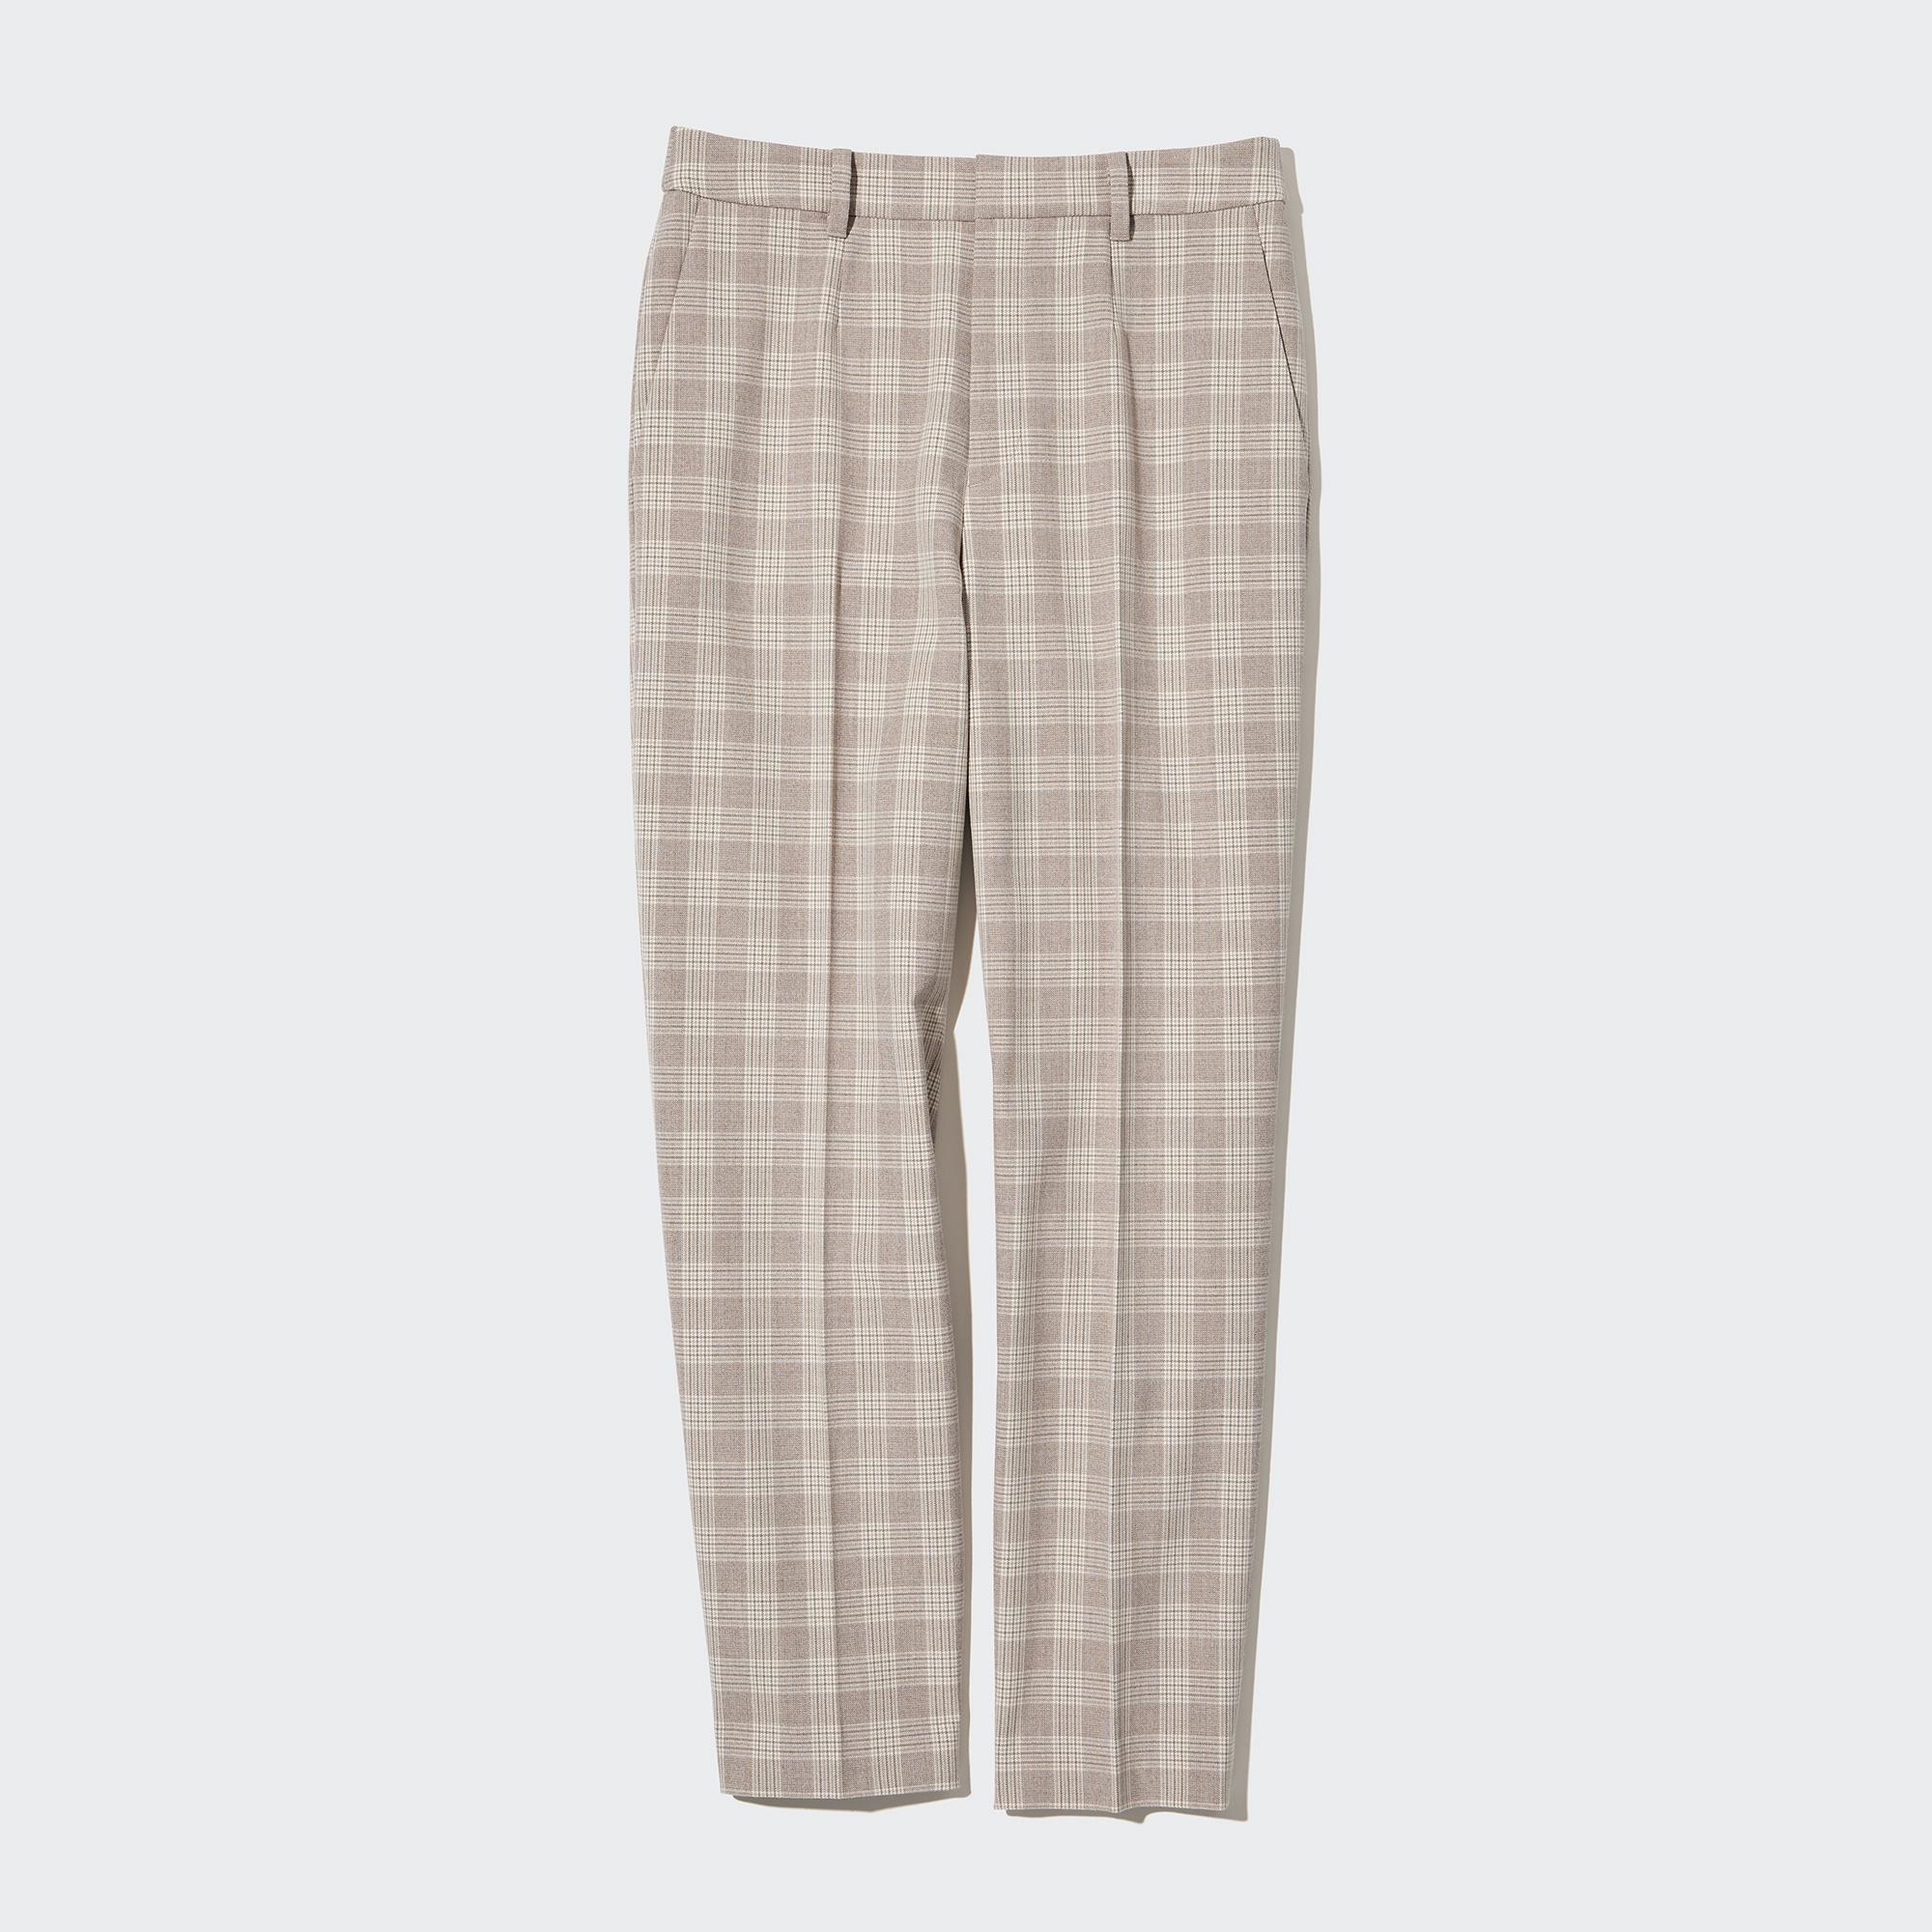 Blackwatch Double Layer Check Trousers Ladies Checked Trousers